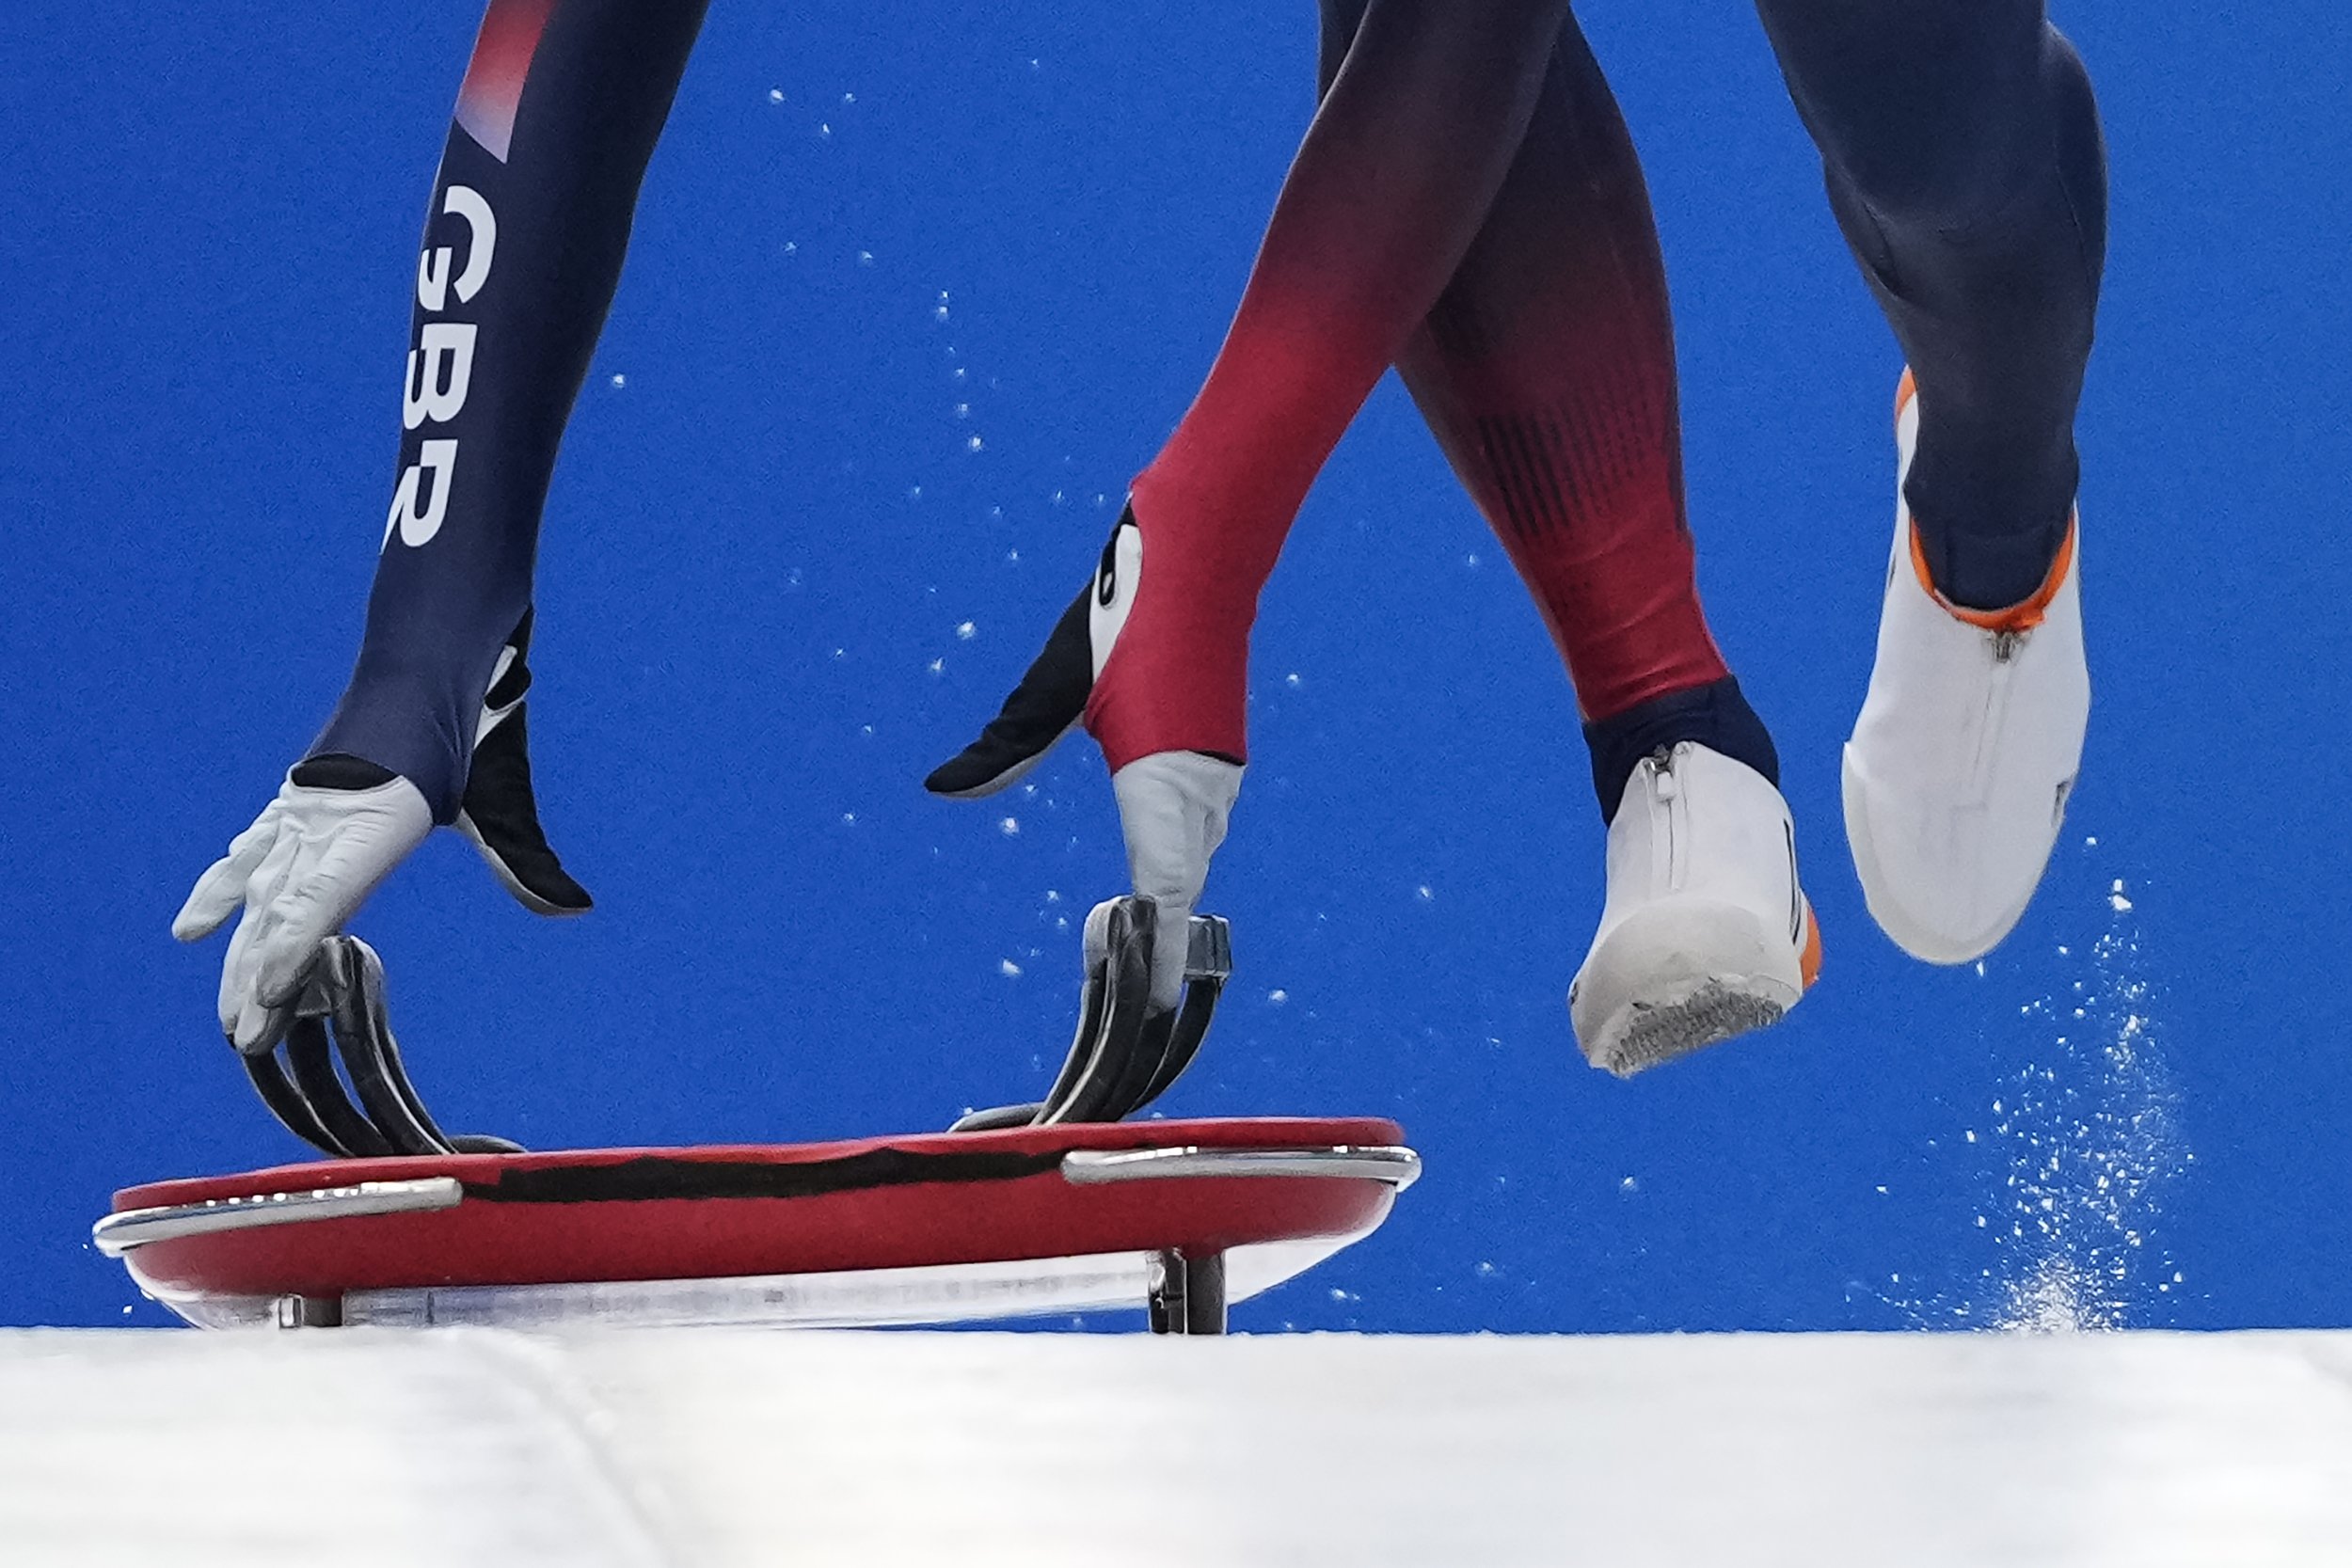  Laura Deas of Britain starts during the women's skeleton training run at the 2022 Winter Olympics, Tuesday, Feb. 8, 2022, in the Yanqing district of Beijing. (AP Photo/Pavel Golovkin) 